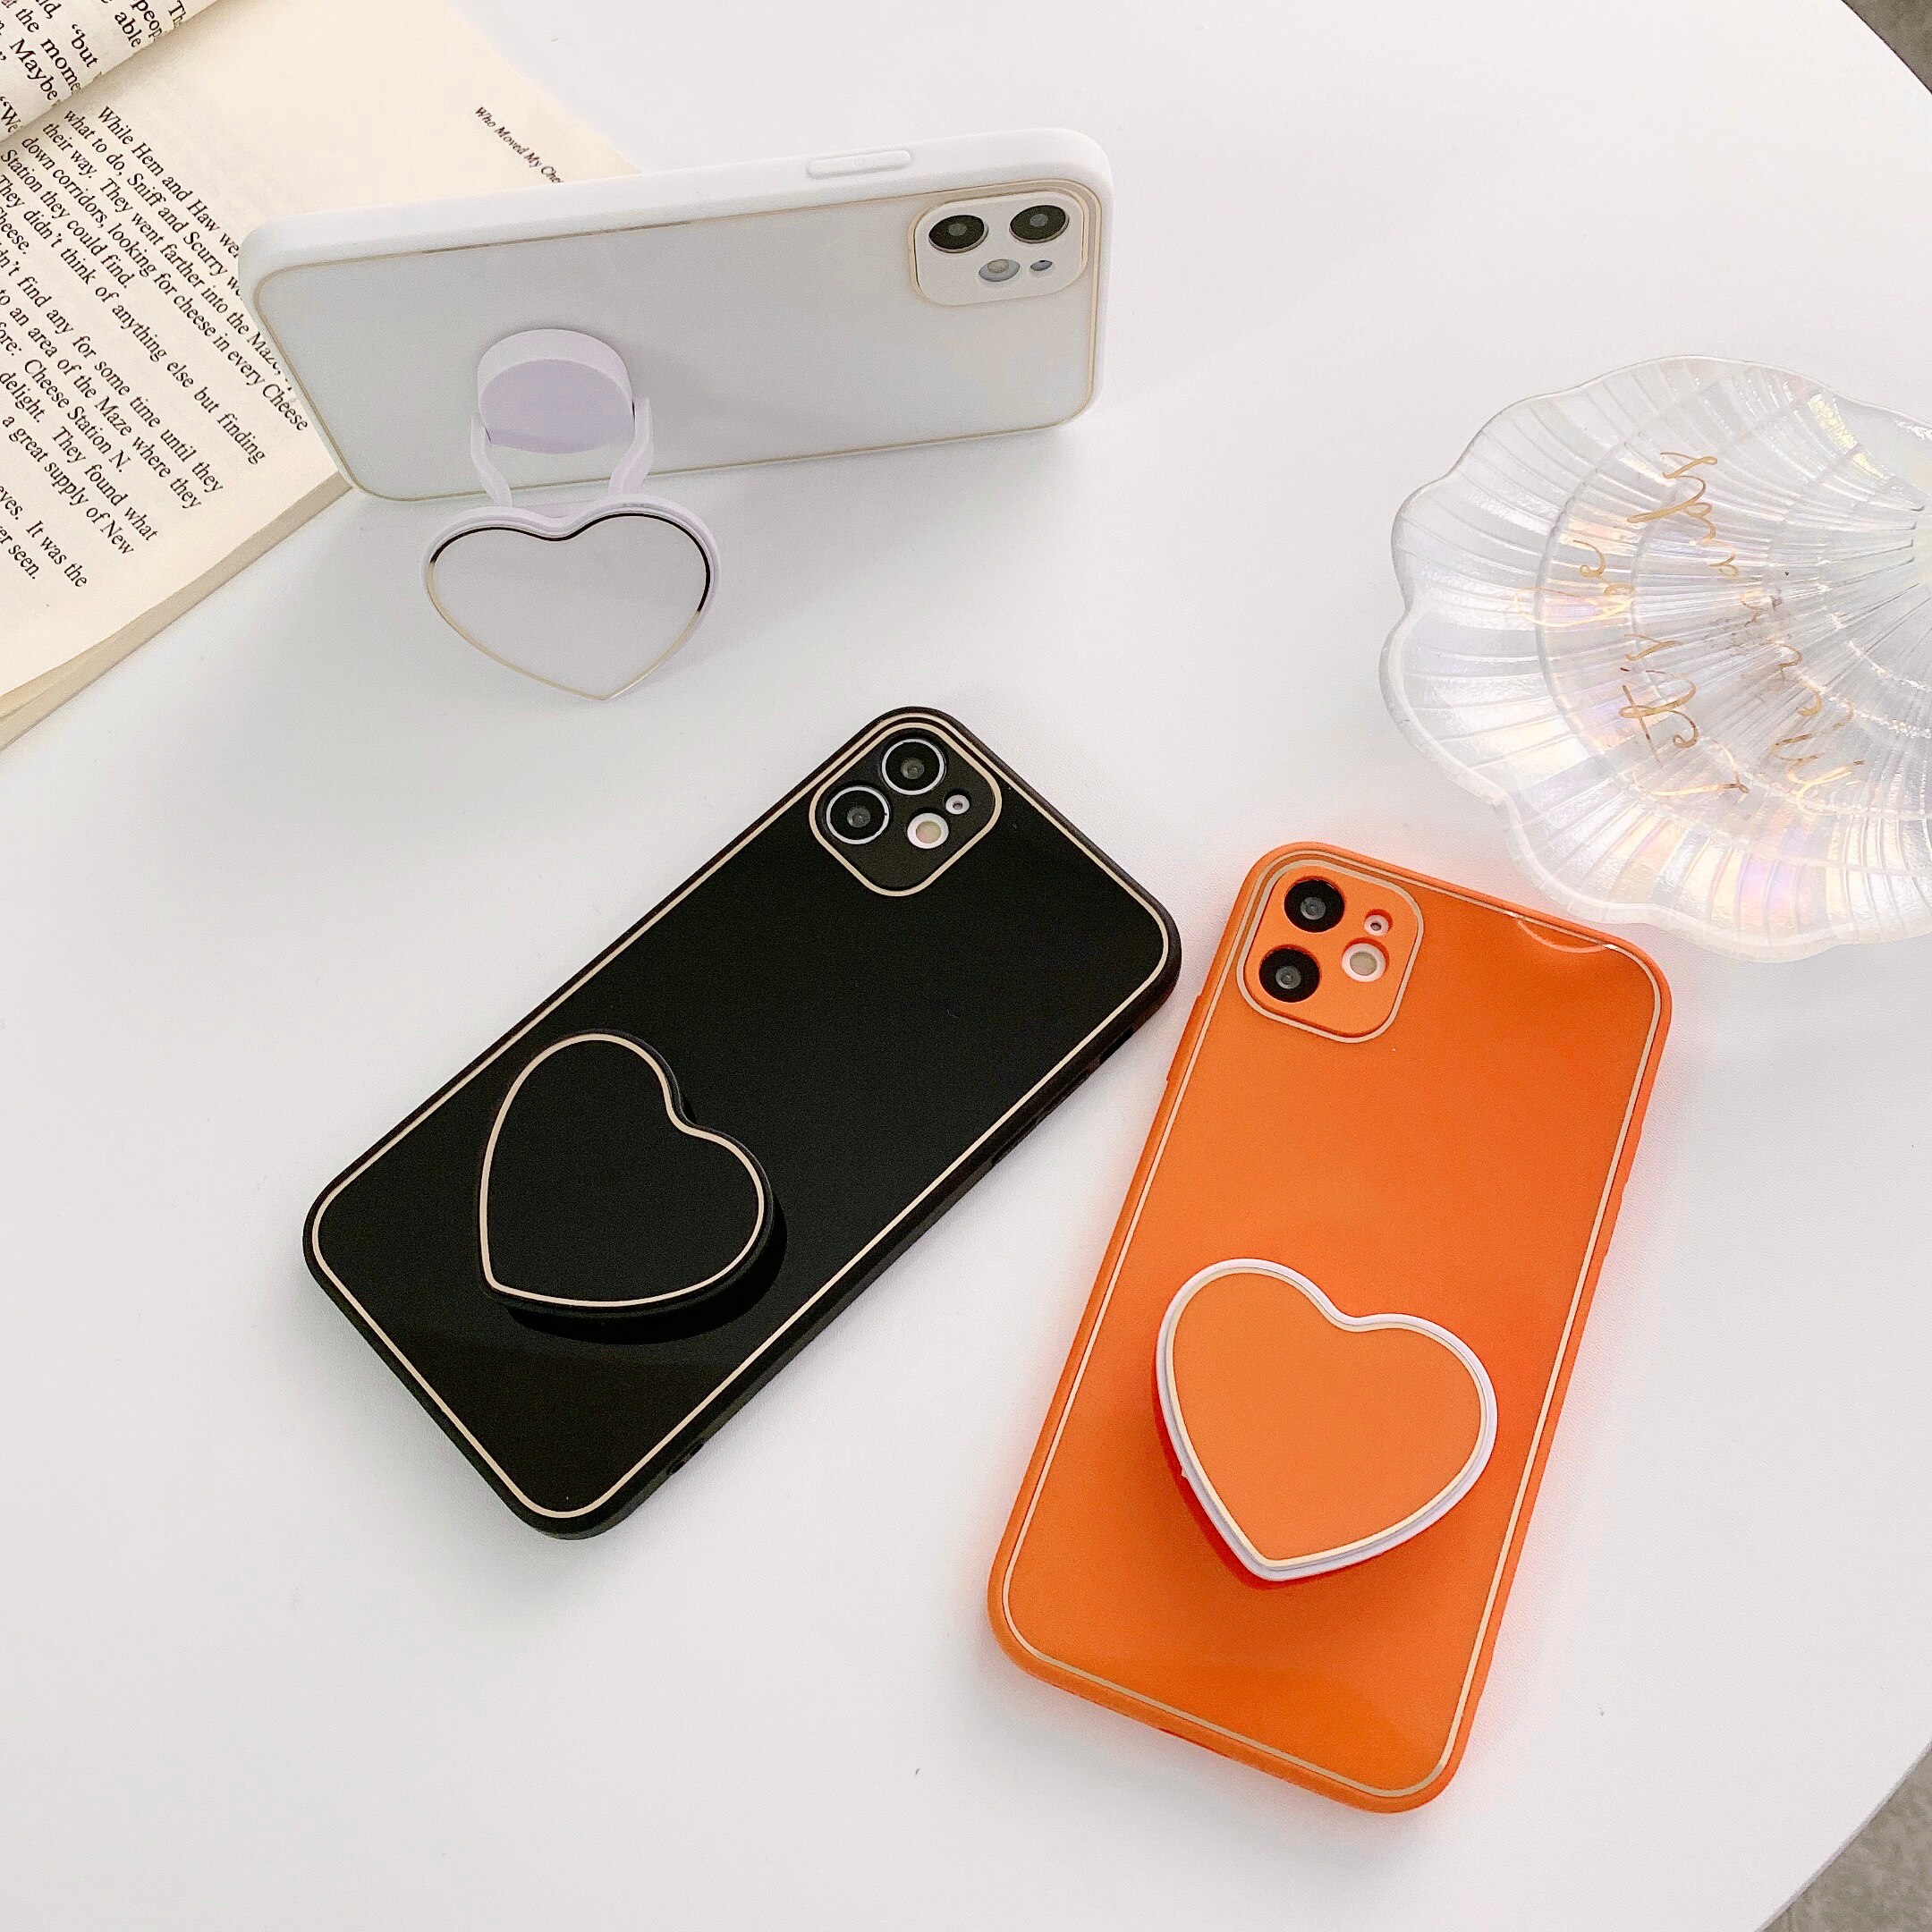 Luxury Plated Gold Heart Holder Case for iPhone 12 Pro Max Silicone Grip Stand Socket Cover for iPhone XR X XS SE 2020 7 Plus 8